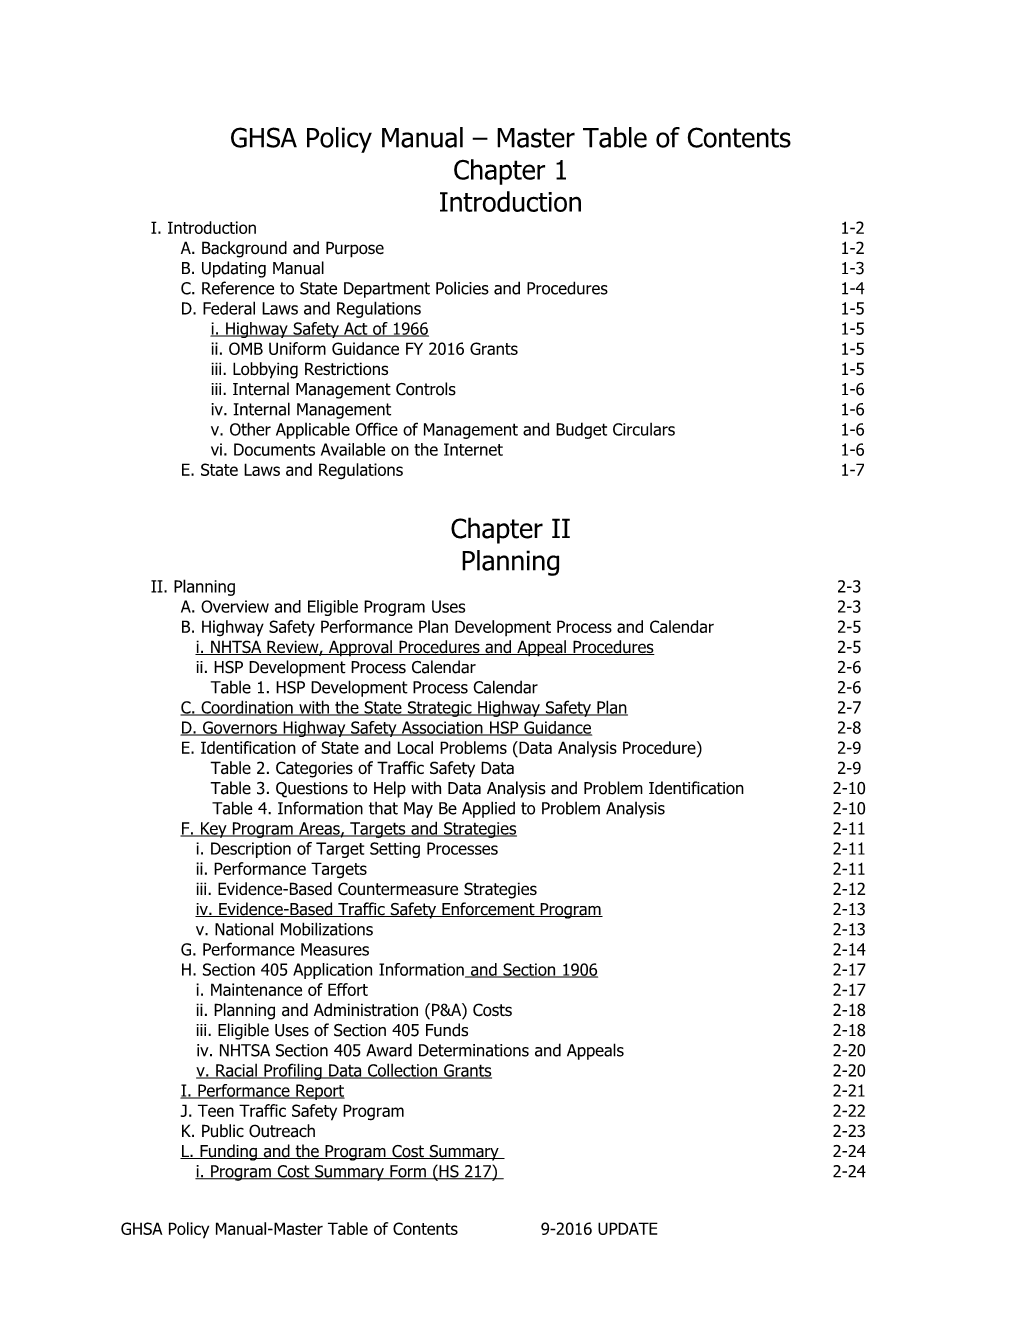 GHSA Policy Manual Master Table of Contents